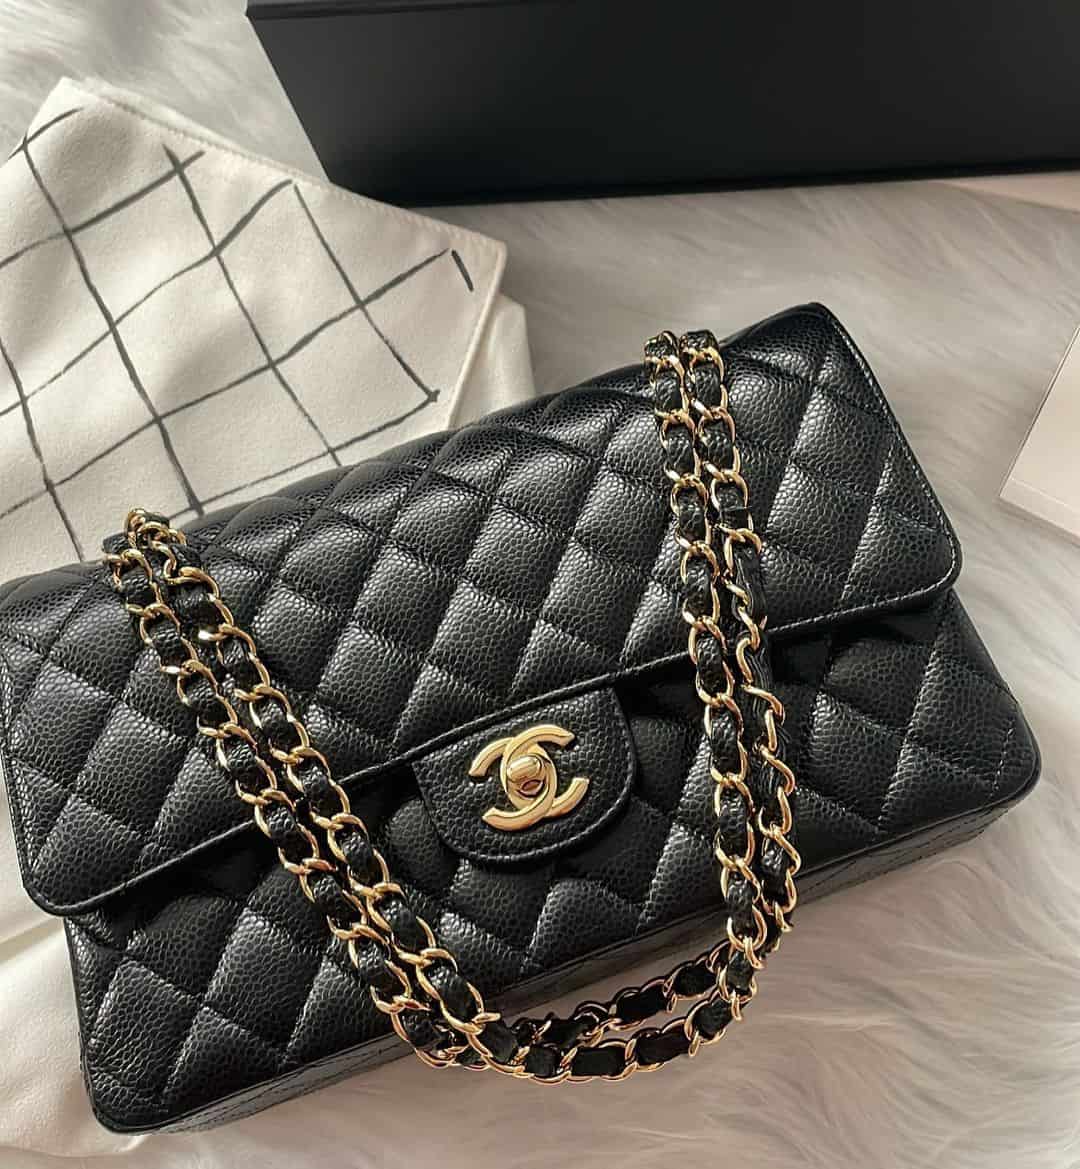 Chanel bag with the highest resale value